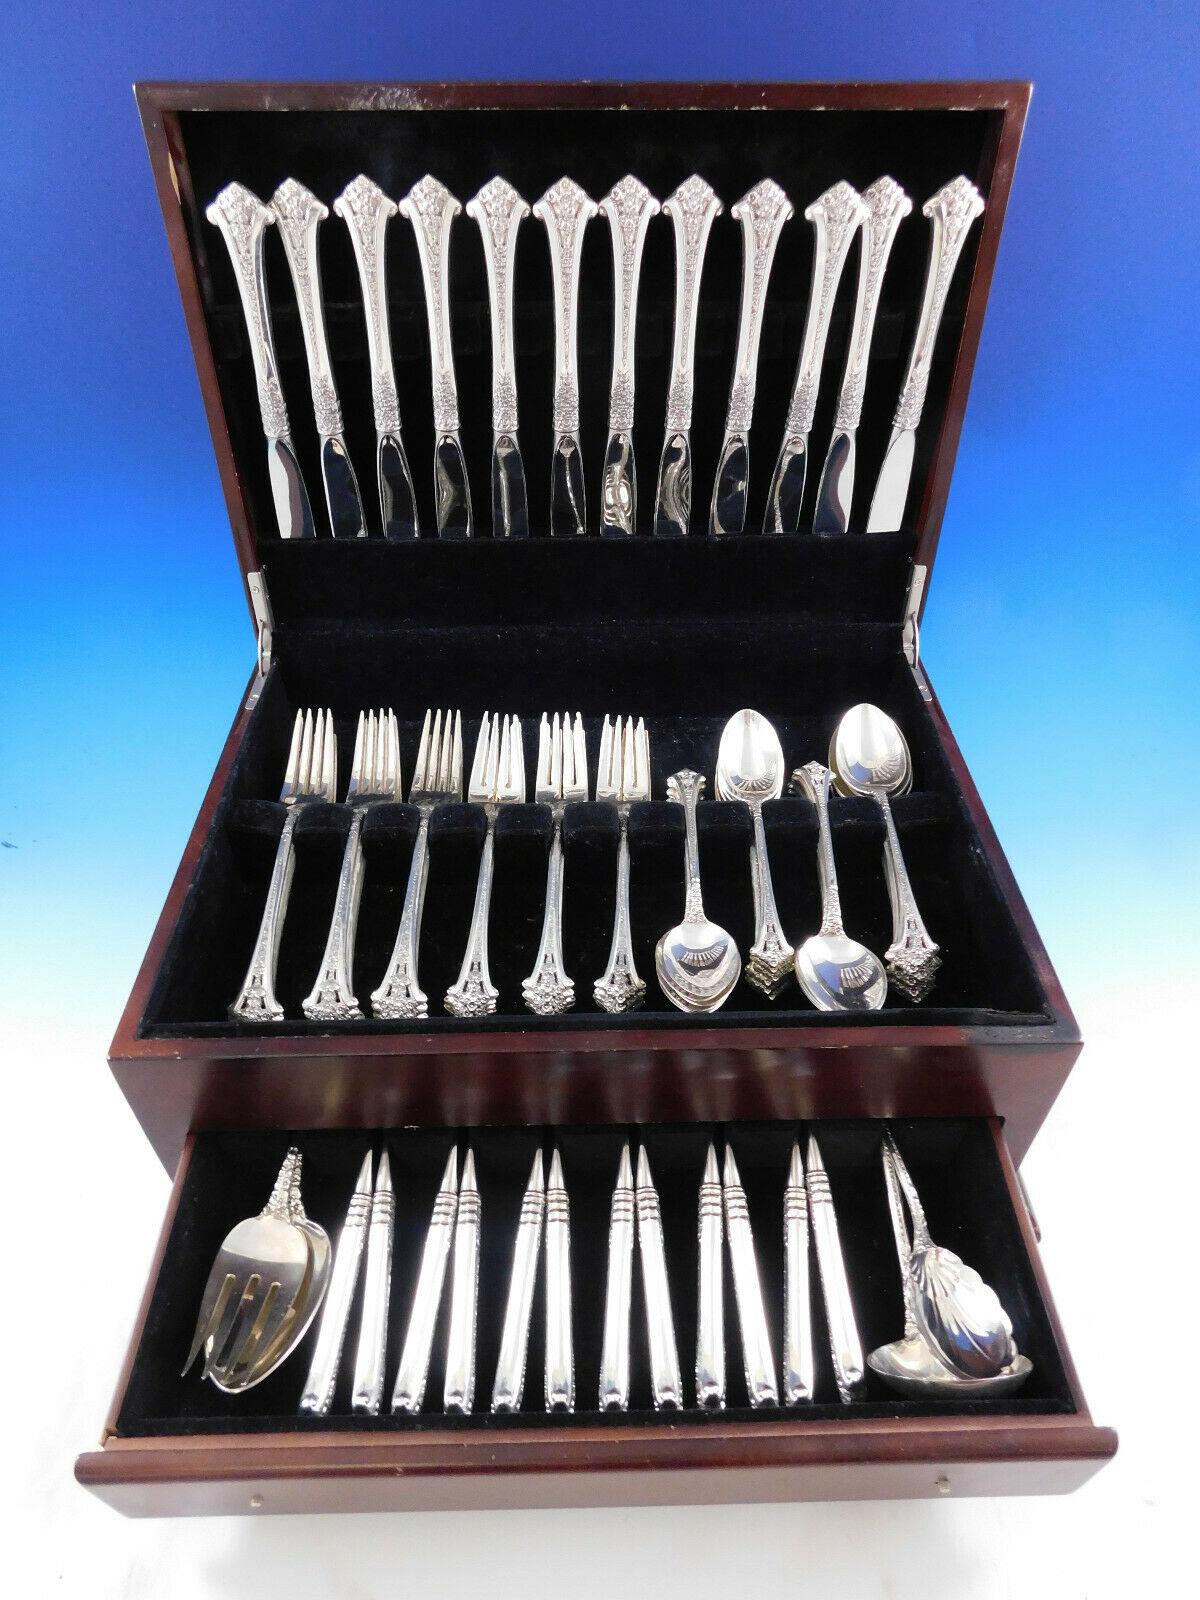 Classic Bouquet by Gorham sterling silver Flatware set, 77 pieces. The handle design is a bouquet of flowers with pierced and beaded detailing. This set includes:

12 place size knives, 9 1/8